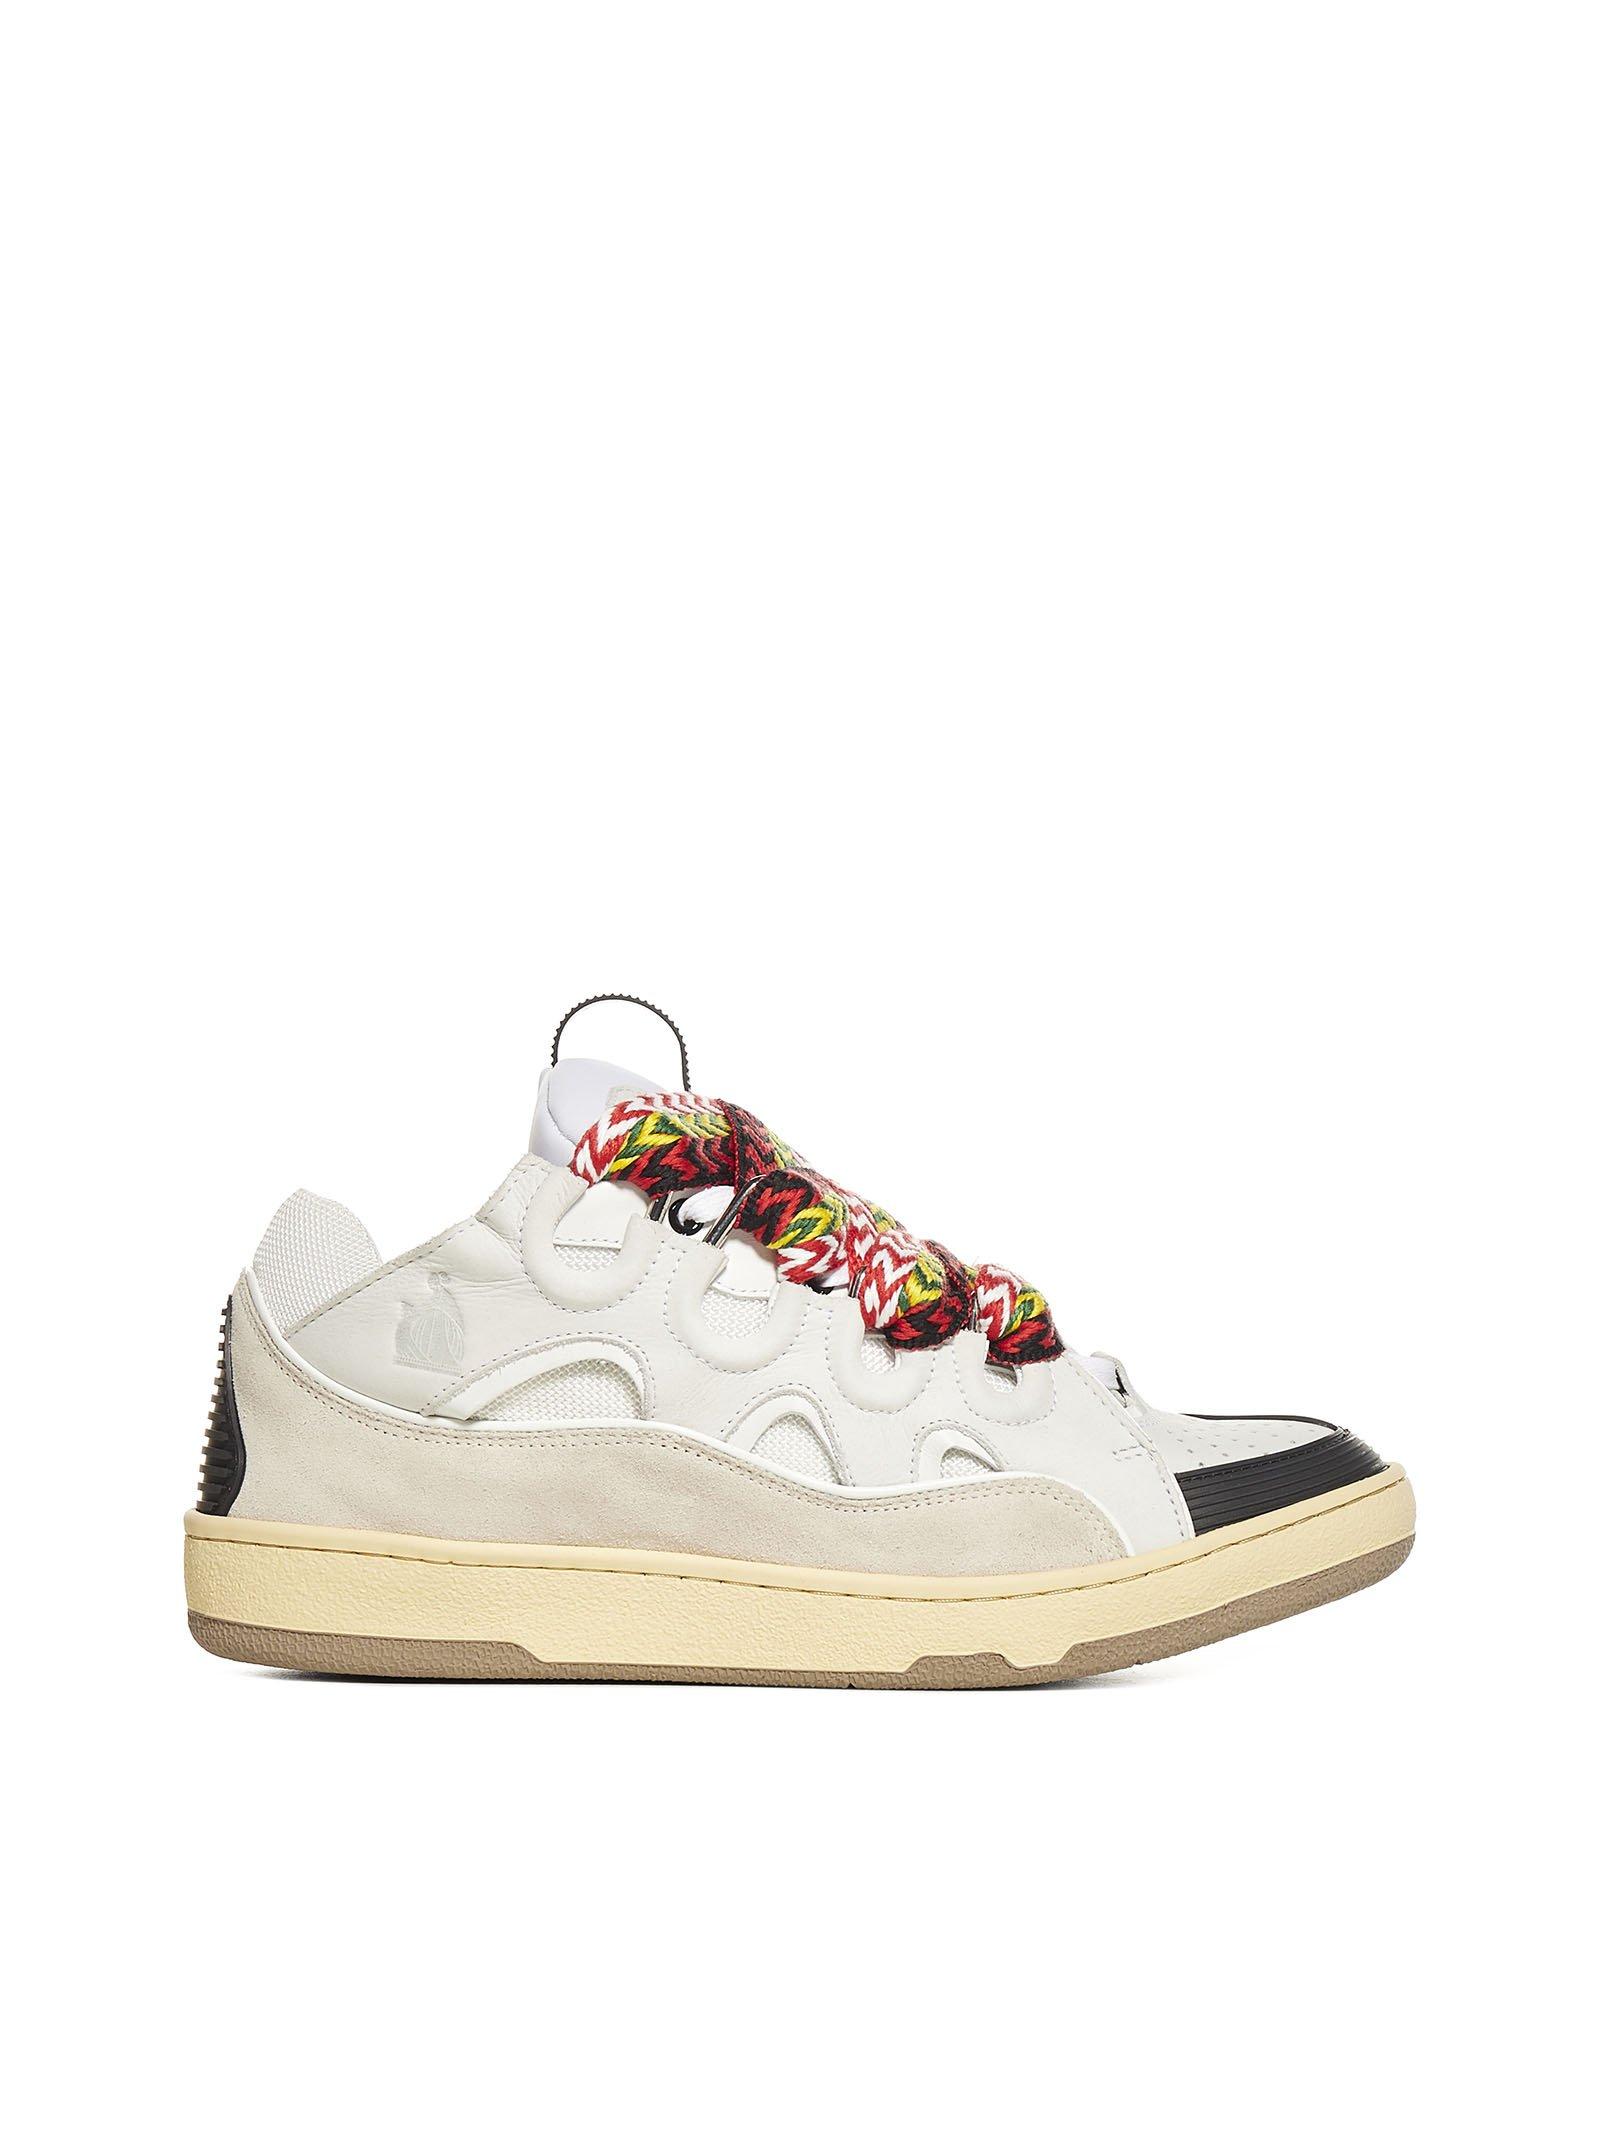 Lanvin Leather Curb Low-top Sneakers in White for Men - Lyst